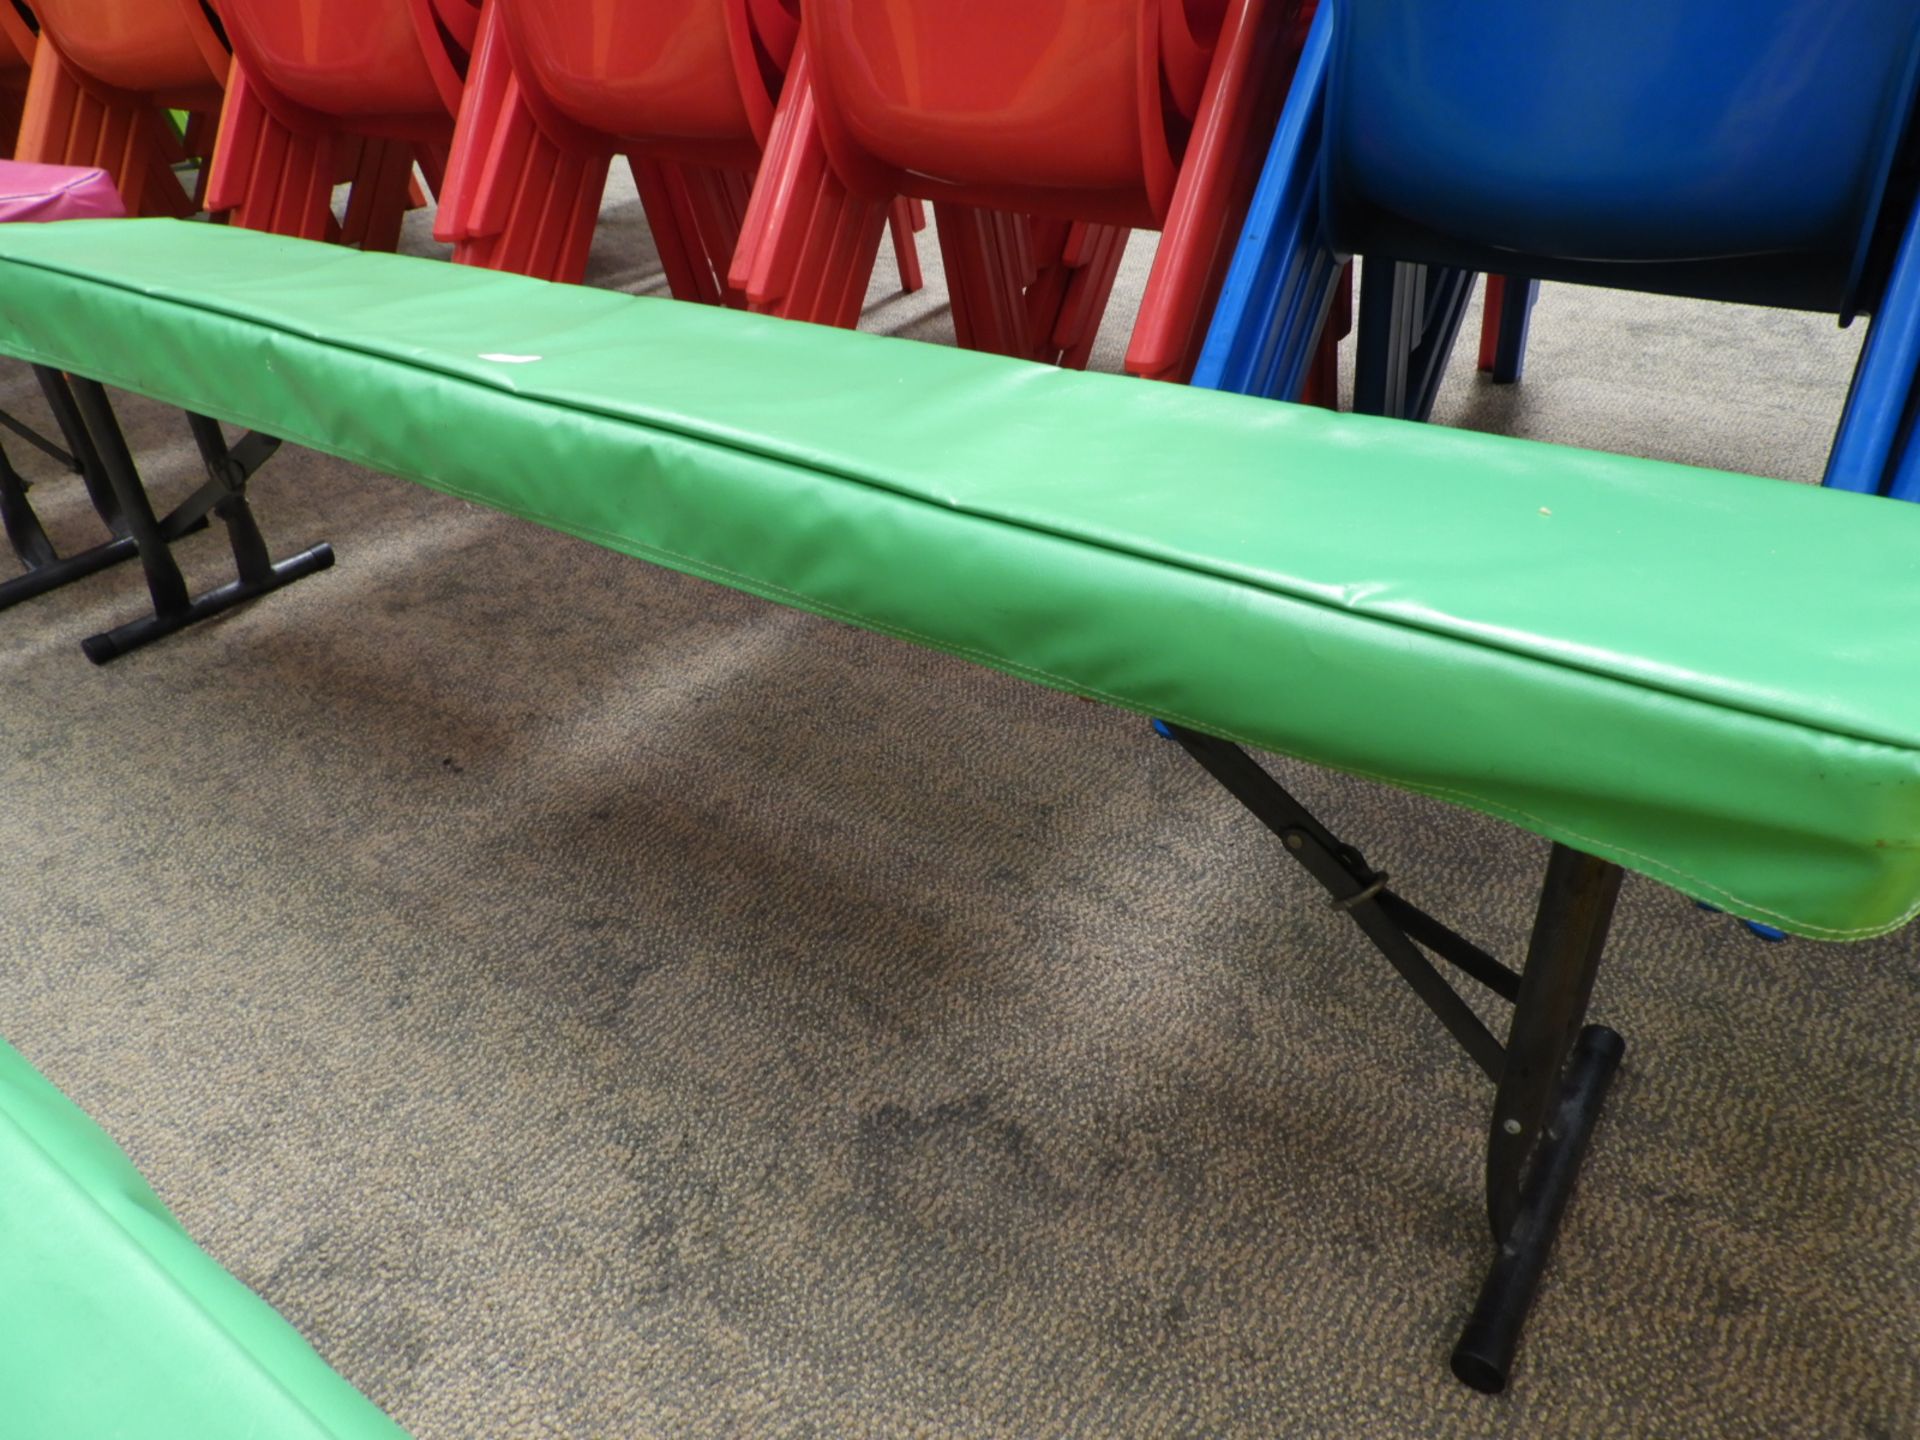 *Children's Party Bench with Folding Legs and Green Vinyl Top